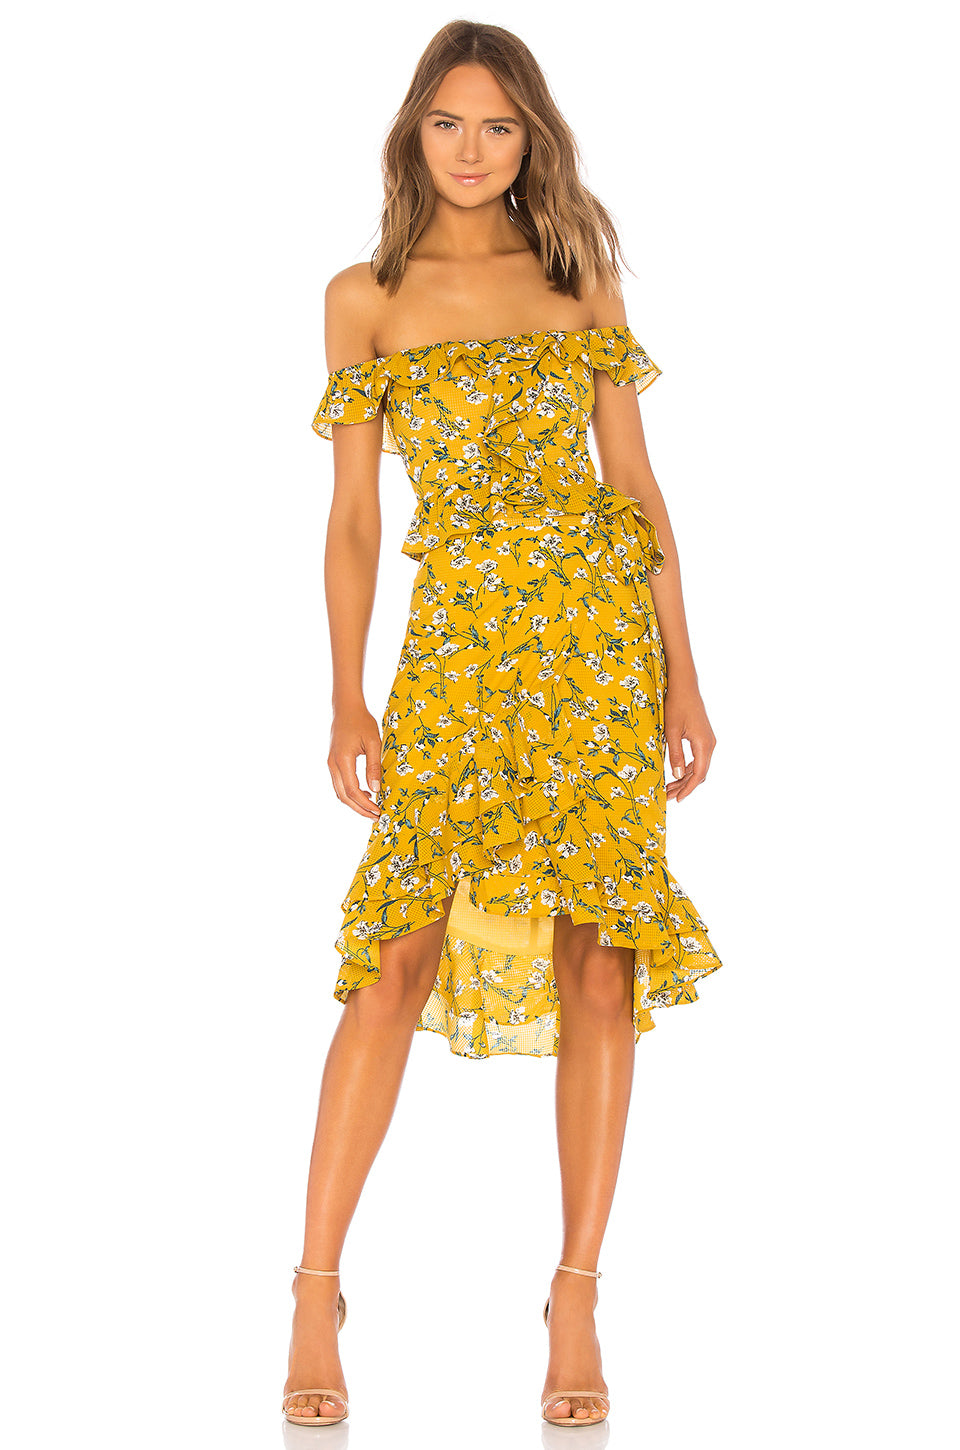 Veronica Skirt in YELLOW DOLLY FLORAL